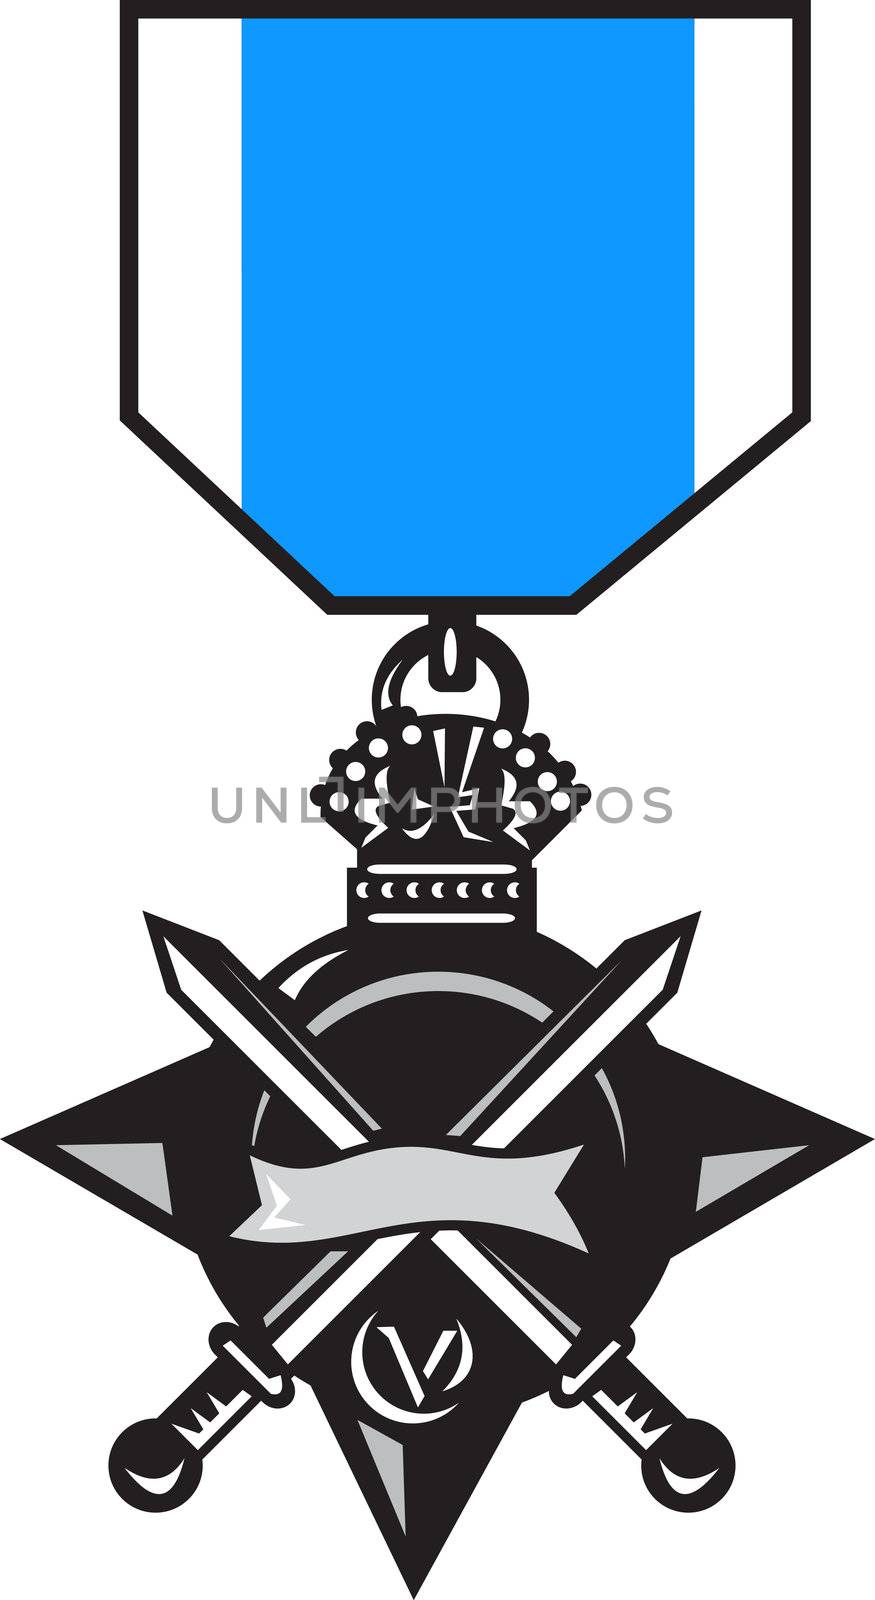 illustration of a military medal of bravery, honor and valor showing a crossed sword with crown isolated on white